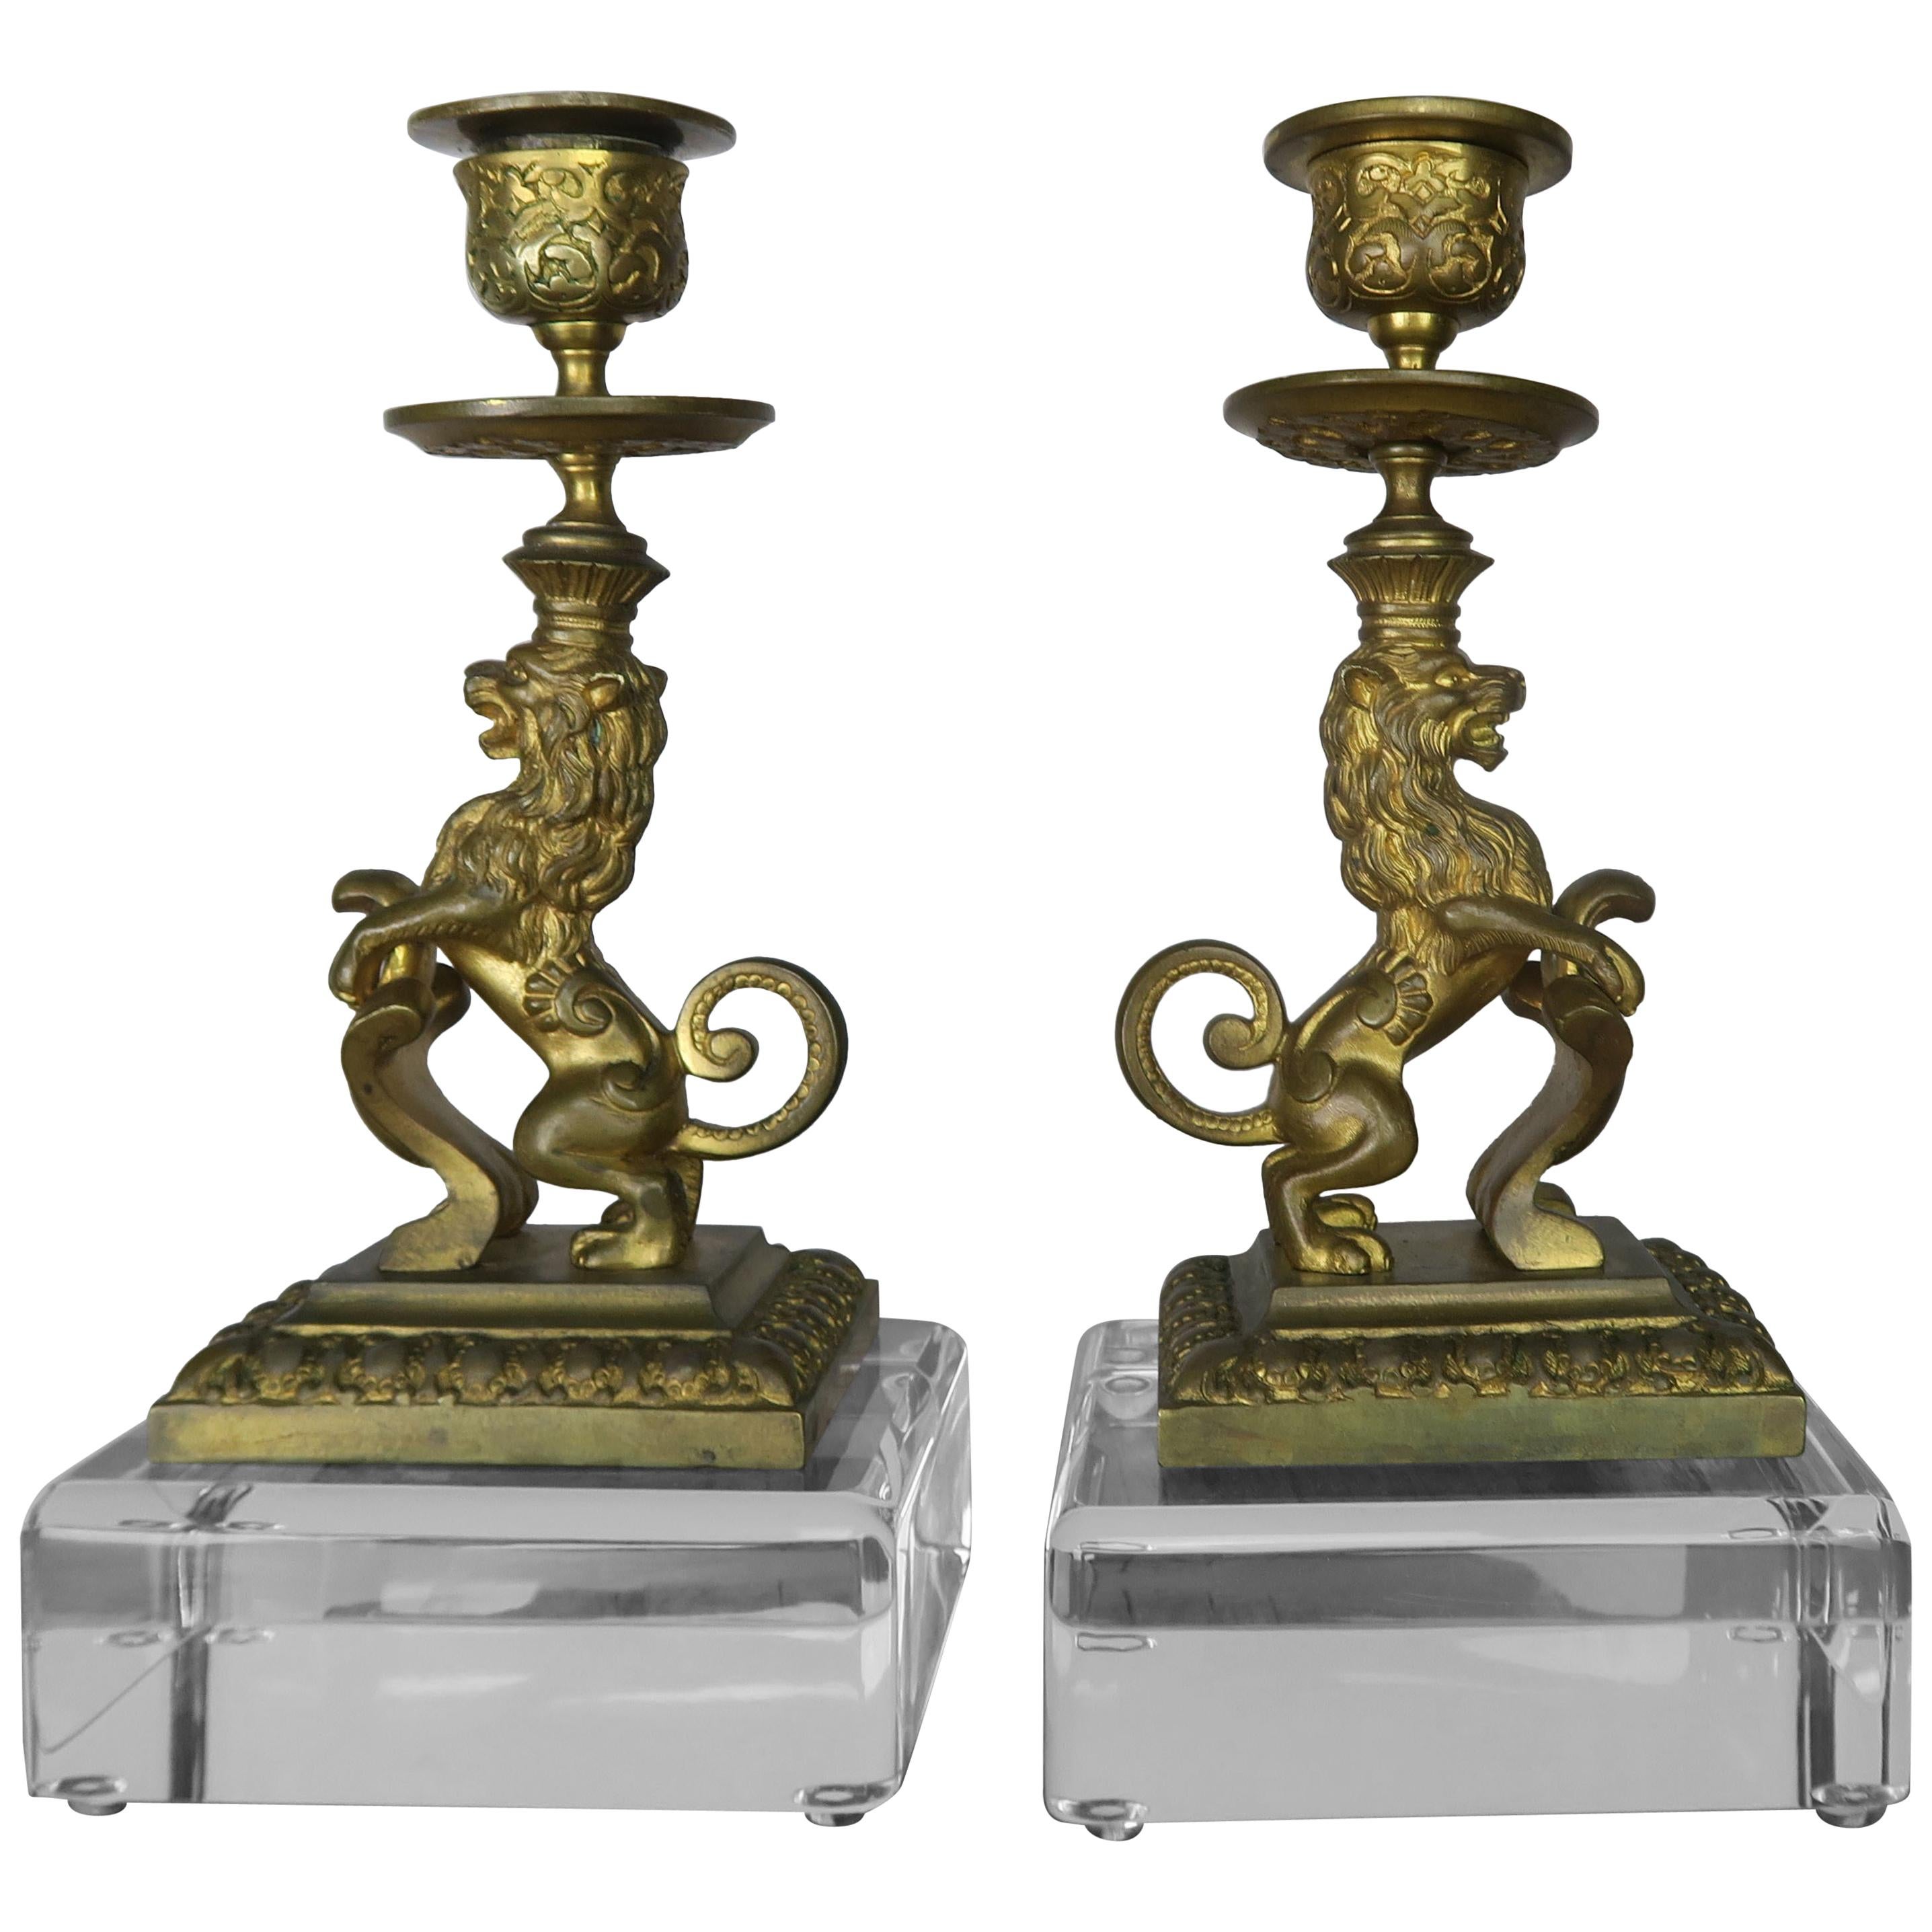 Bronze Lion Candleholders on Lucite Bases, Pair